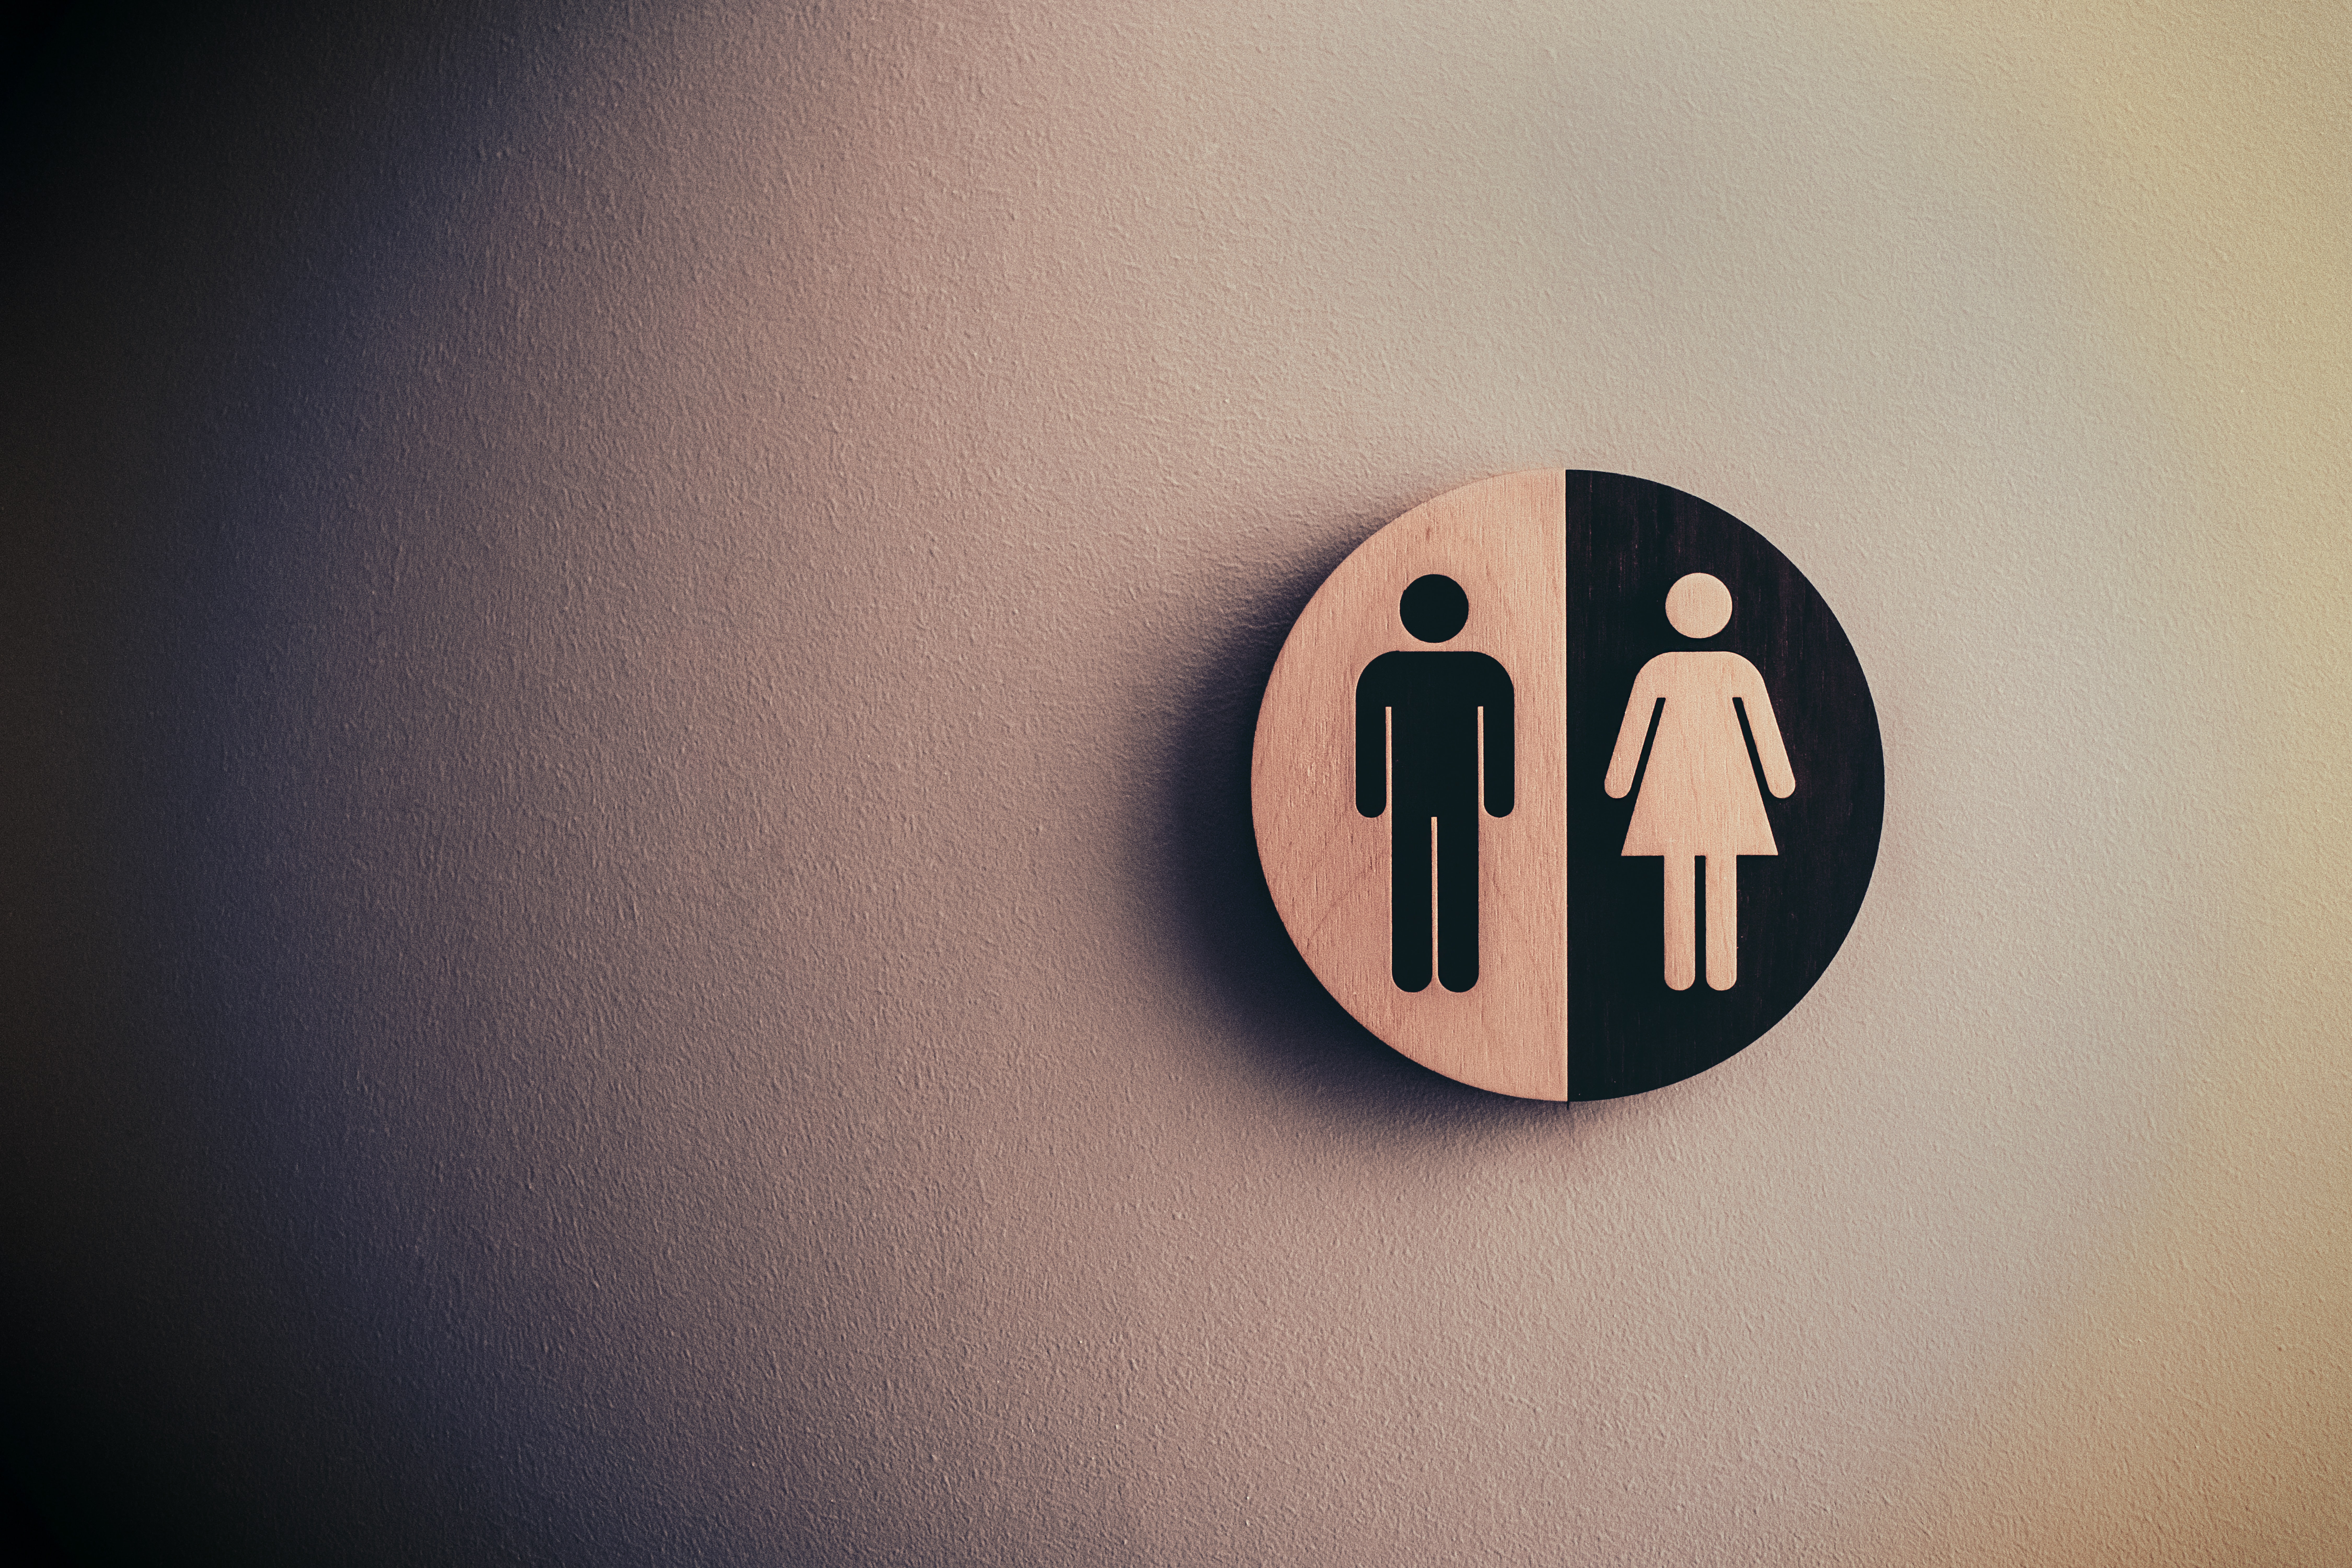 Circular Male/female logo used for public toilets. Male figure is black on a white background, and the female figure is white on a black background.